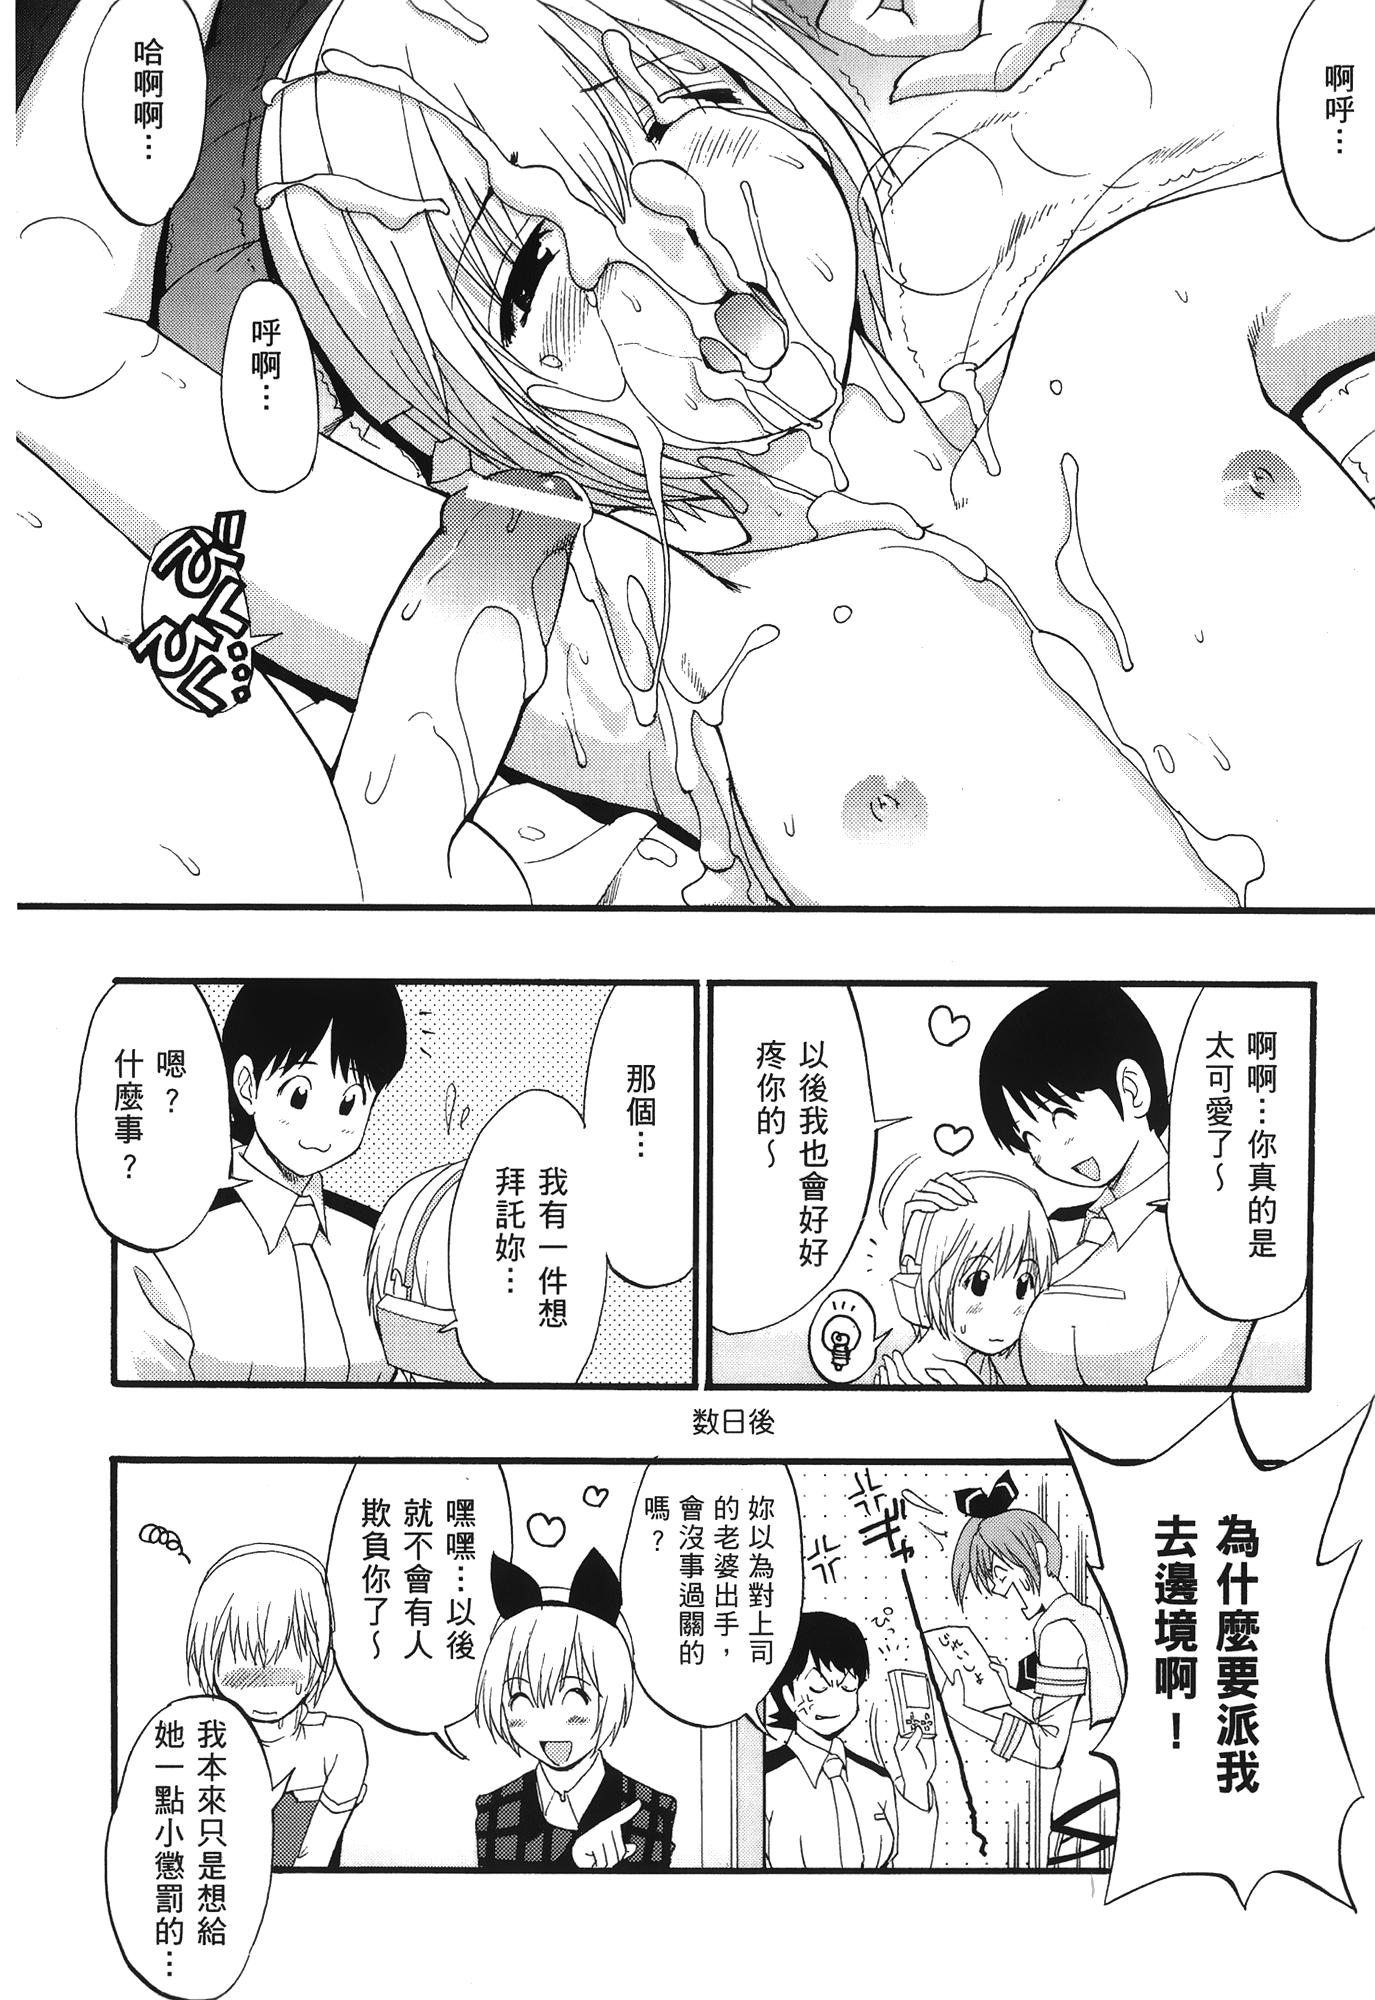 Sesso [Saigado] THE YURI & FRIENDS 6 (King of Fighters) | 武鬥美少女 [Chinese] - King of fighters Mujer - Page 159